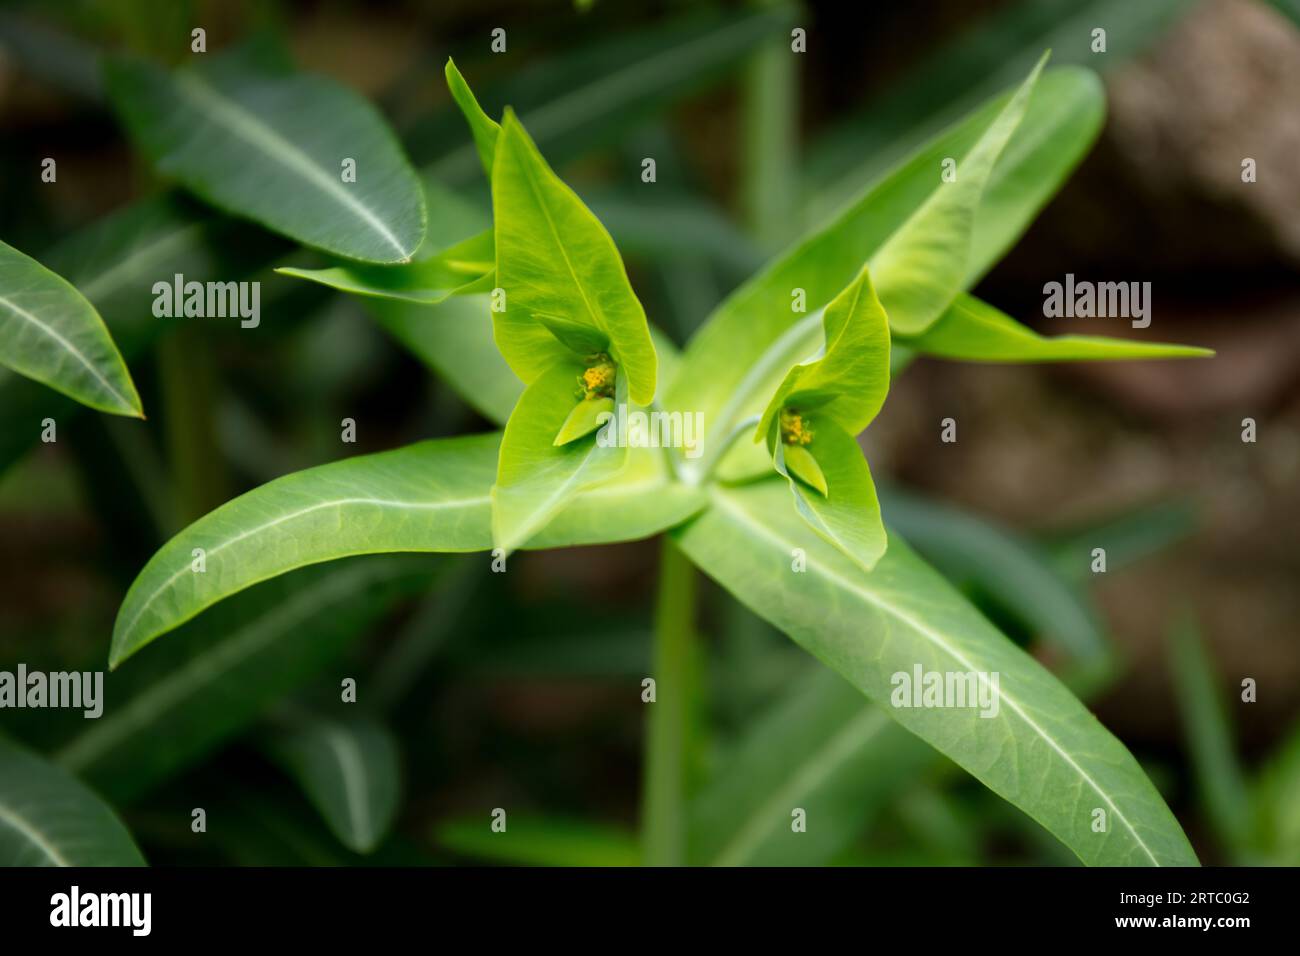 Close-up of young leaves and green flower of Caper Spurge, Euphorbia lathyris Stock Photo